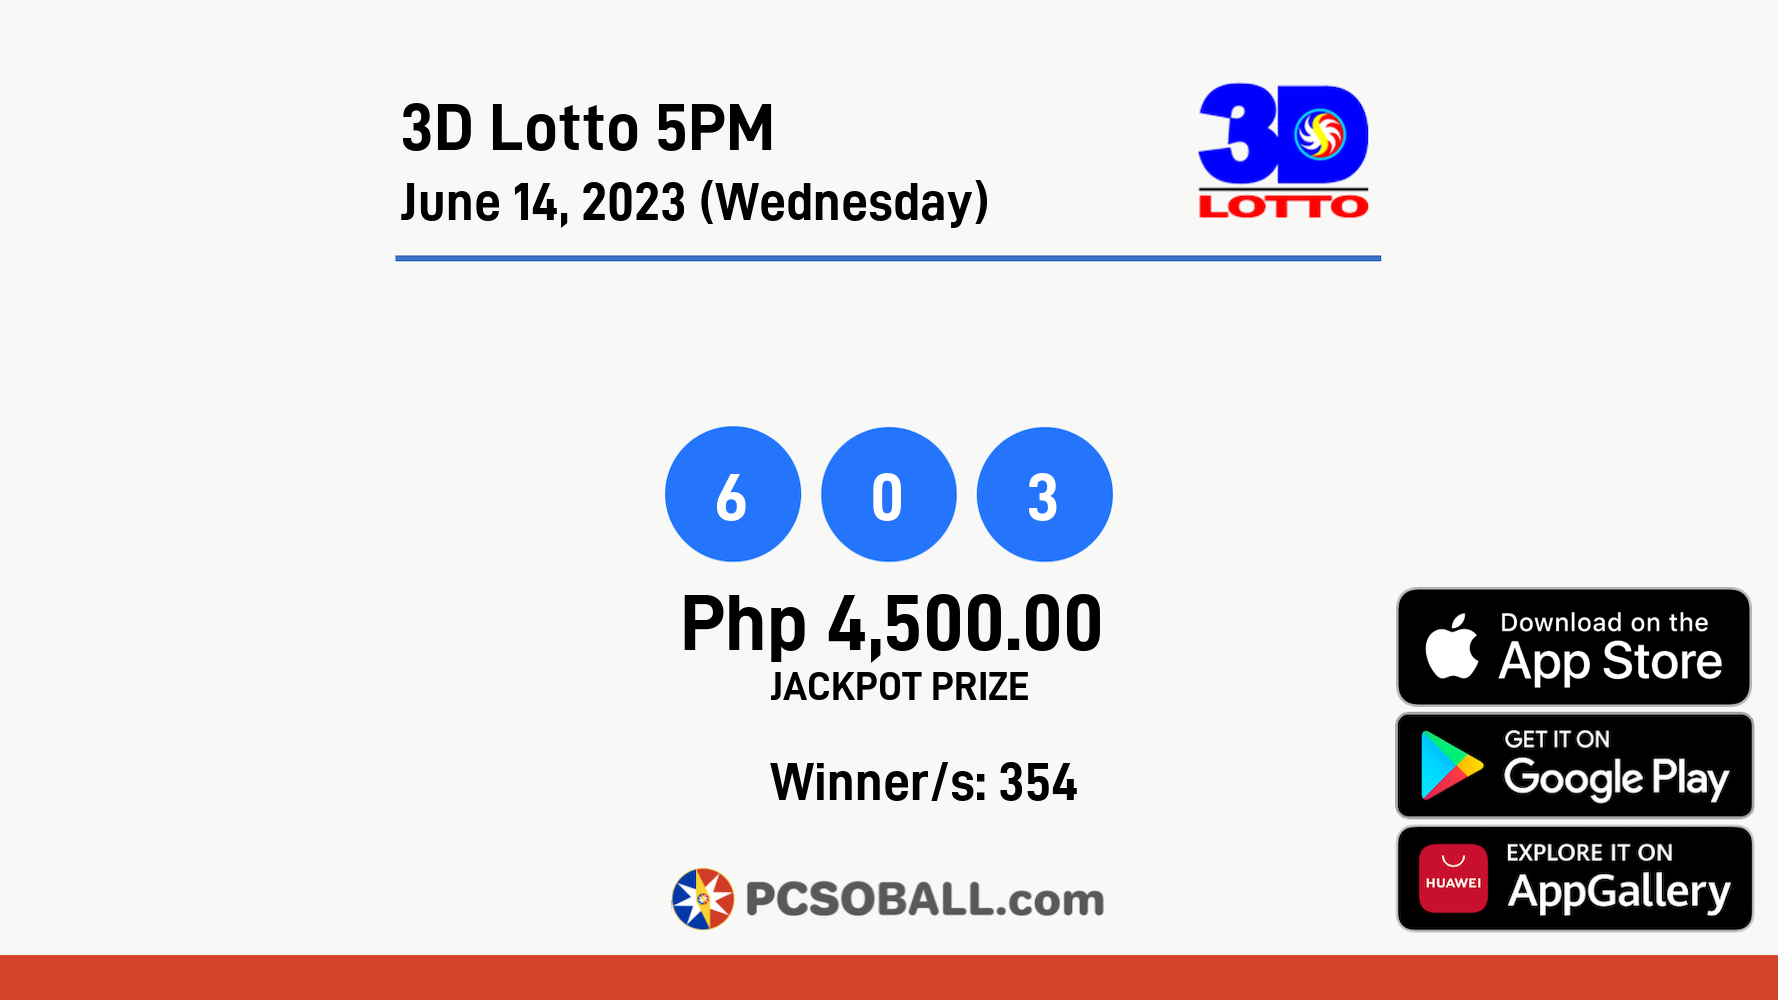 3D Lotto 5PM June 14, 2023 (Wednesday) Result